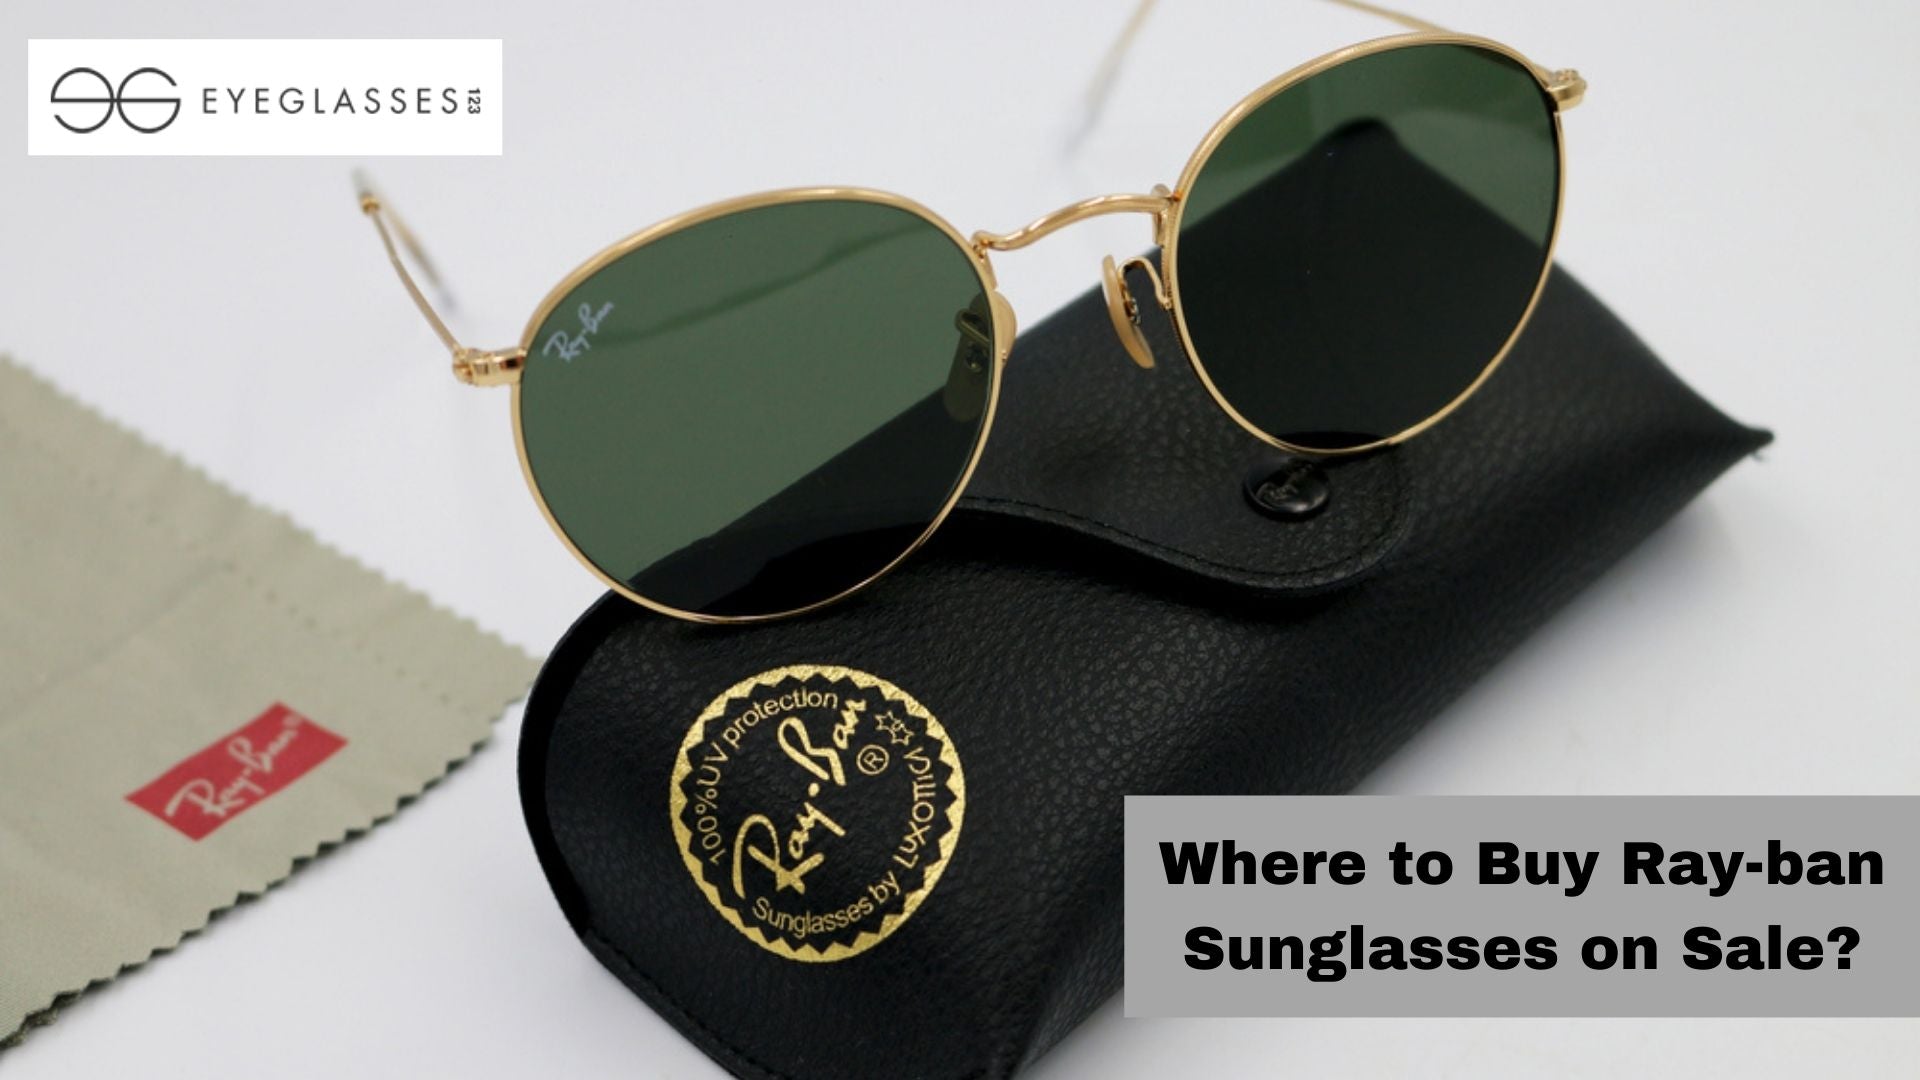 Where to Buy Ray-ban Sunglasses on Sale?